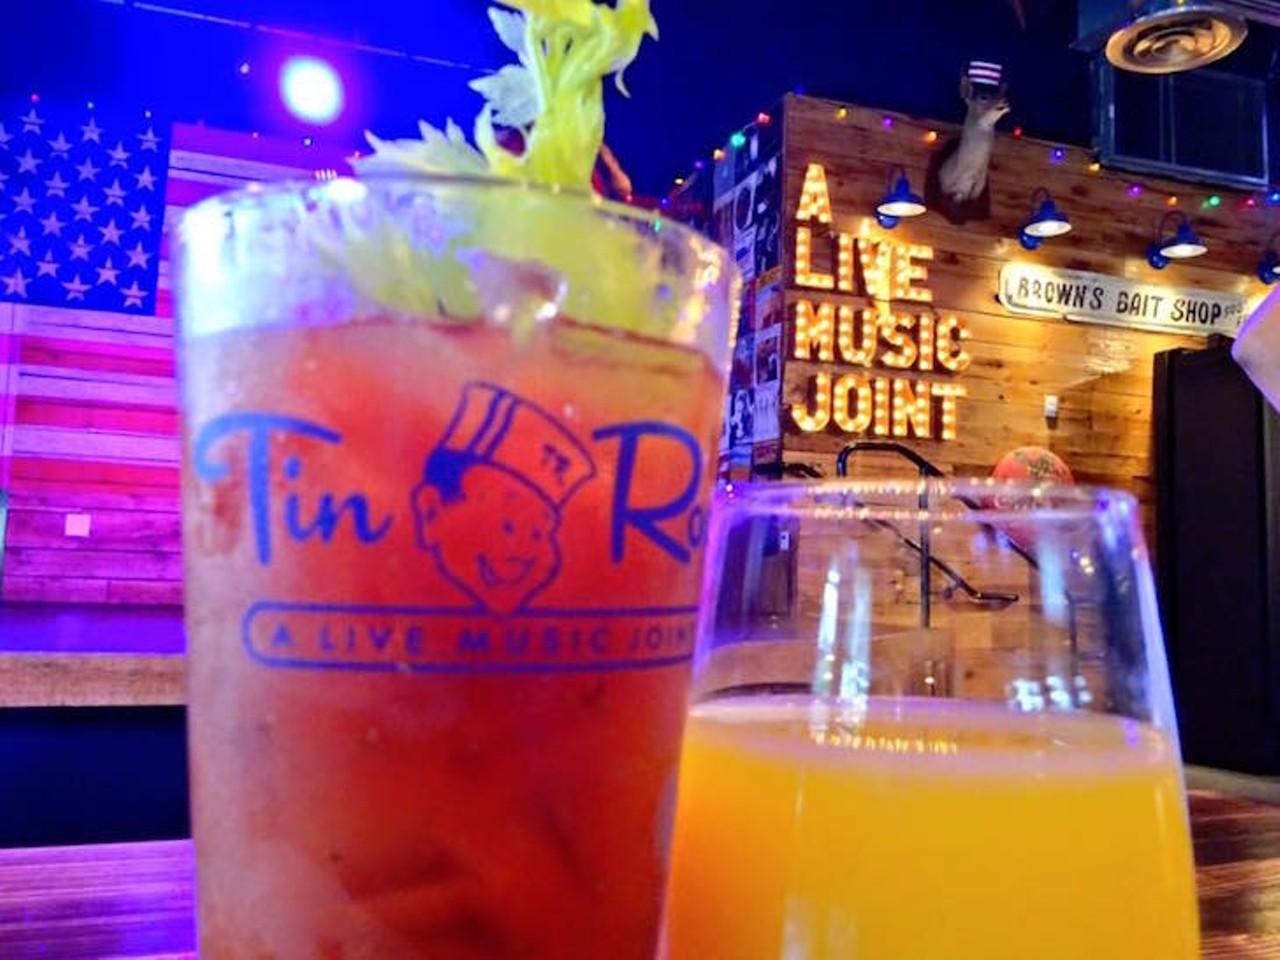 Tin Roof
8371 International Drive, 407-270-7926
Unlimited Bloody Marys are served up at this live music joint on Sundays from 11 a.m. to 2 p.m. for $14 where you can customize with all the fixin&#146;s. 
Photo via Tin Roof/Facebook